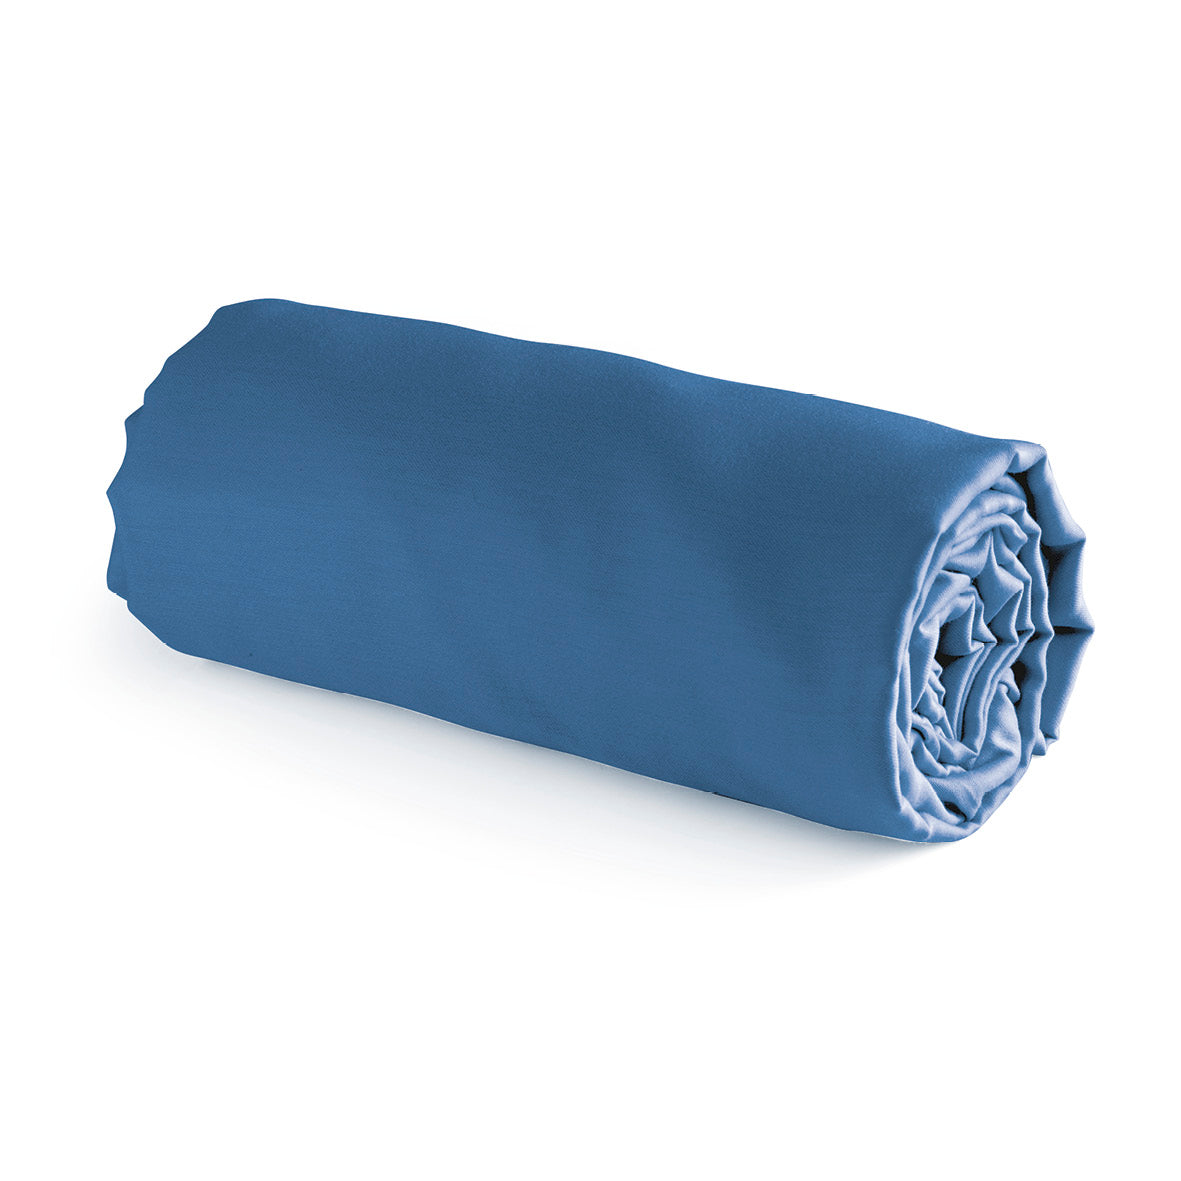 Fitted sheet cotton satin - Blue